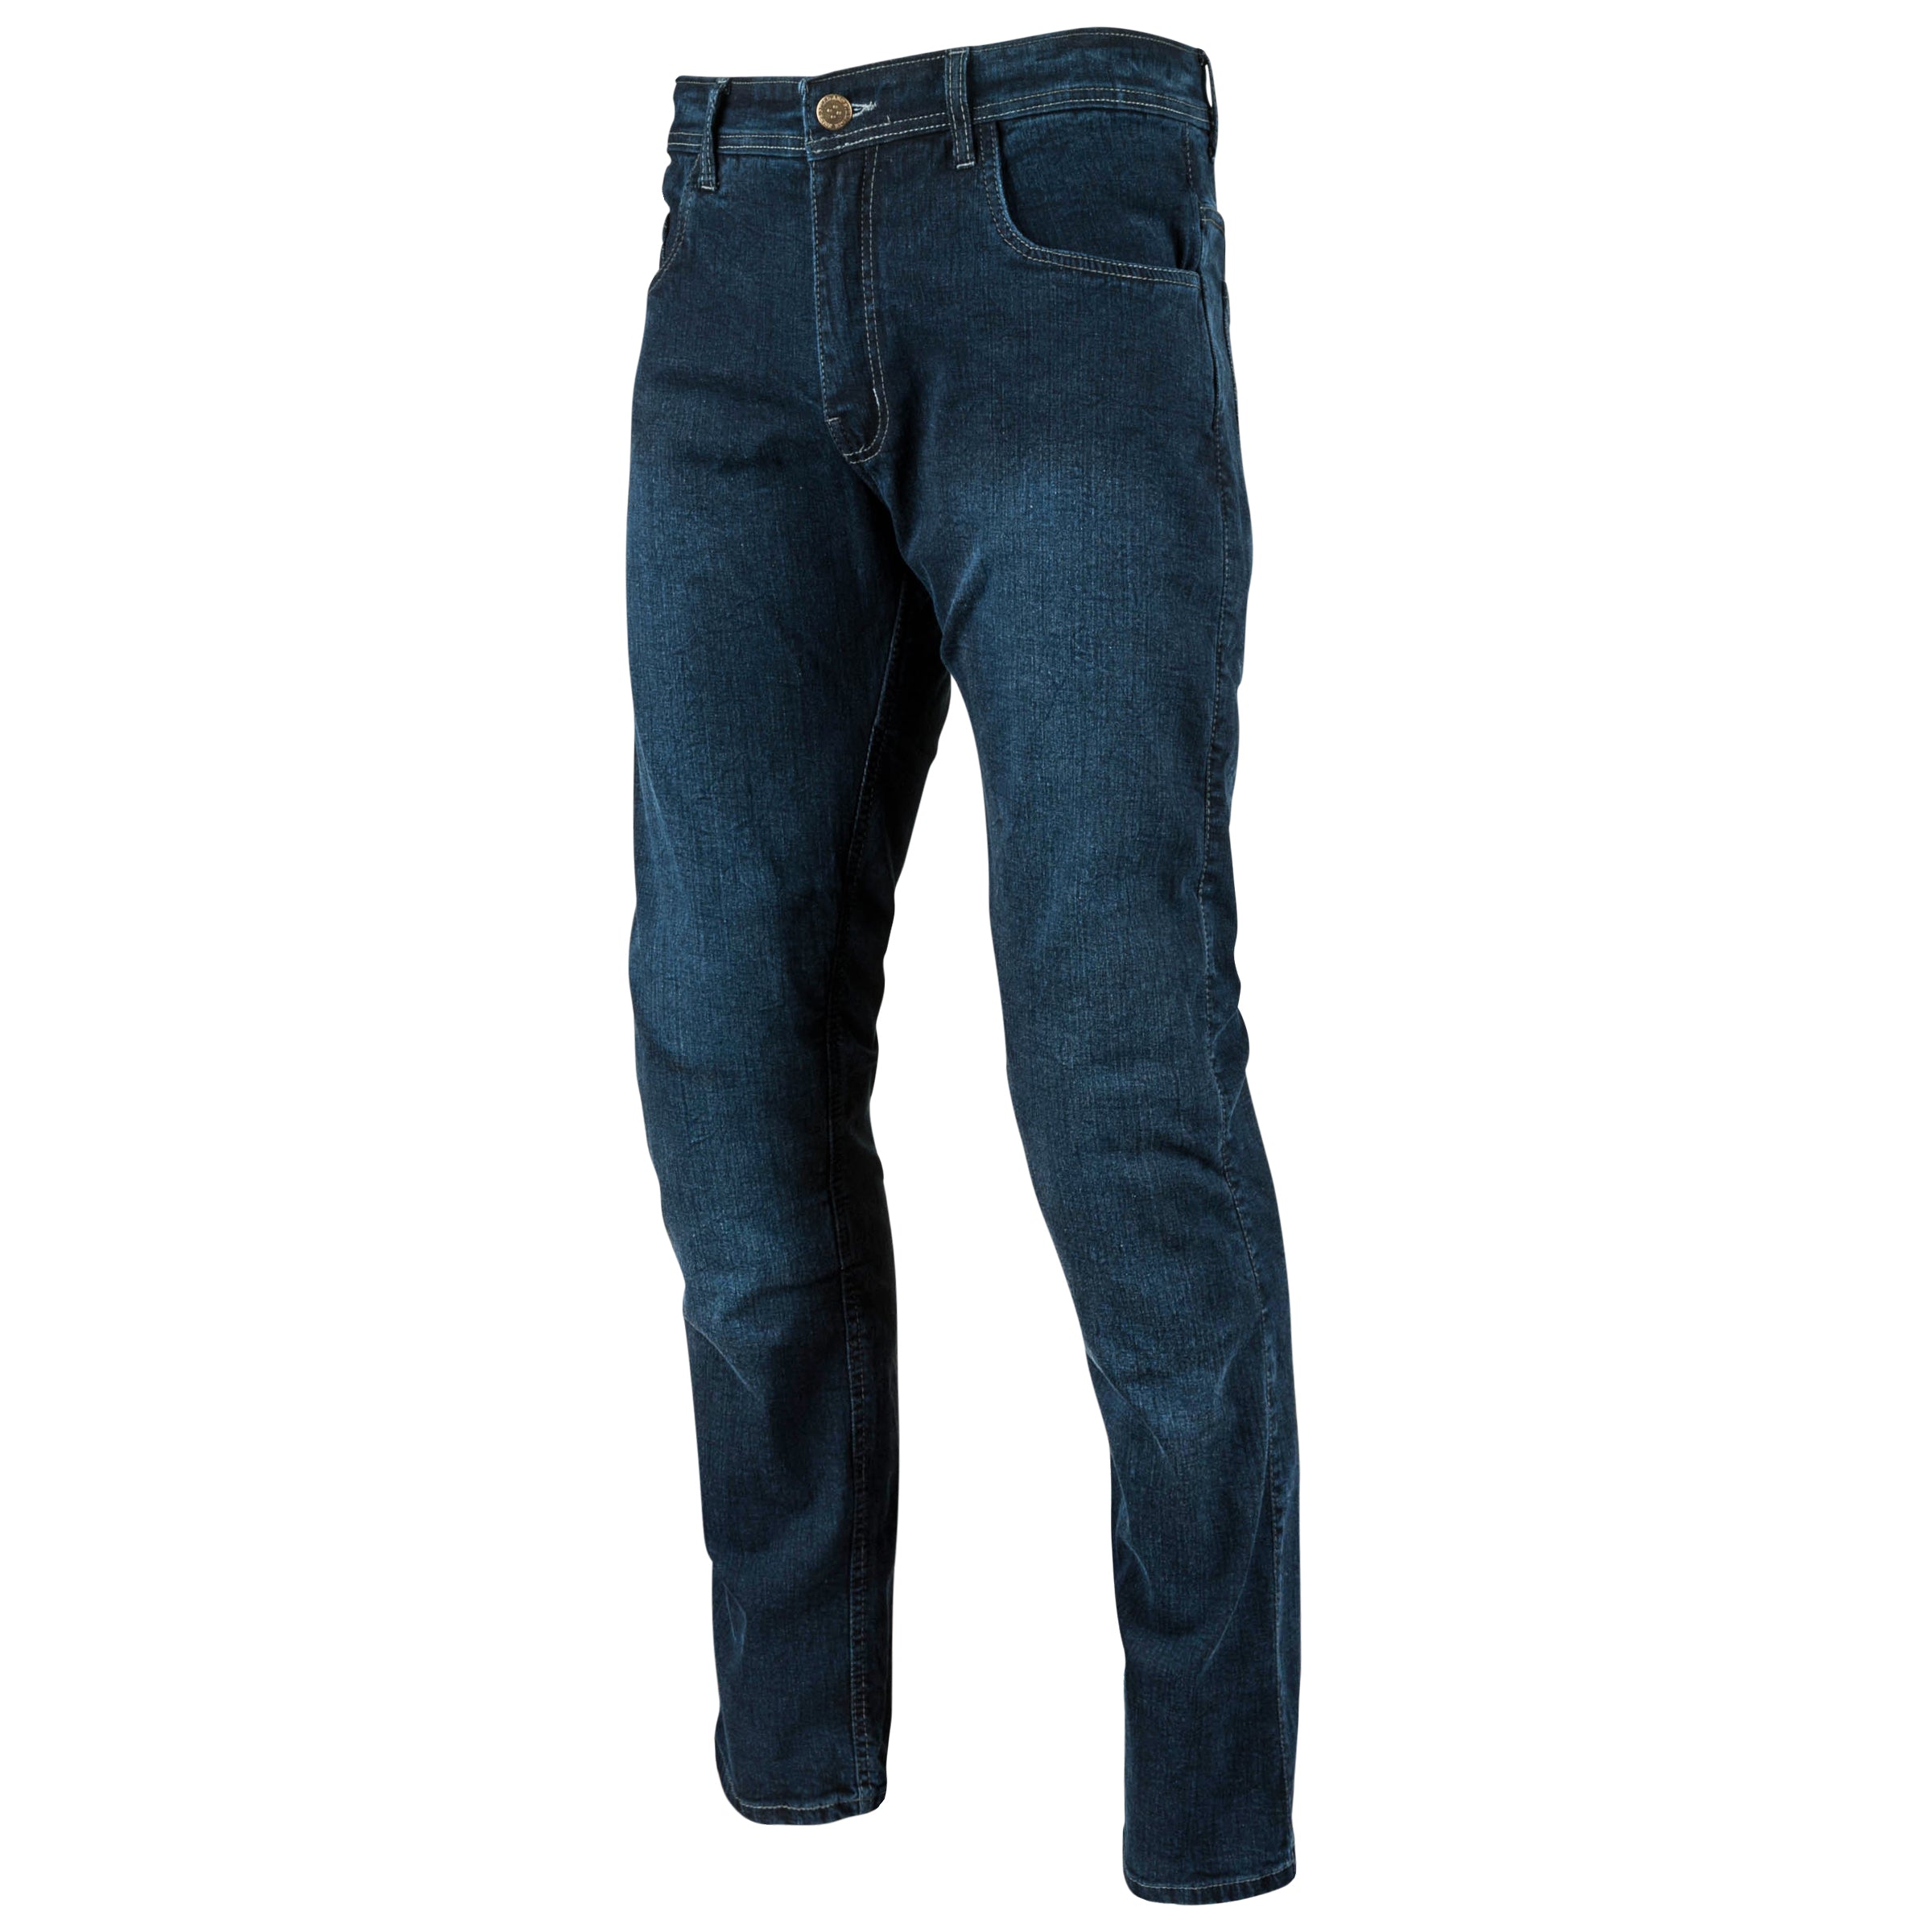 NEW 2023 Kevlar/Aramid Lined Armored Riding Jeans Blue Jeans – Armored Squid